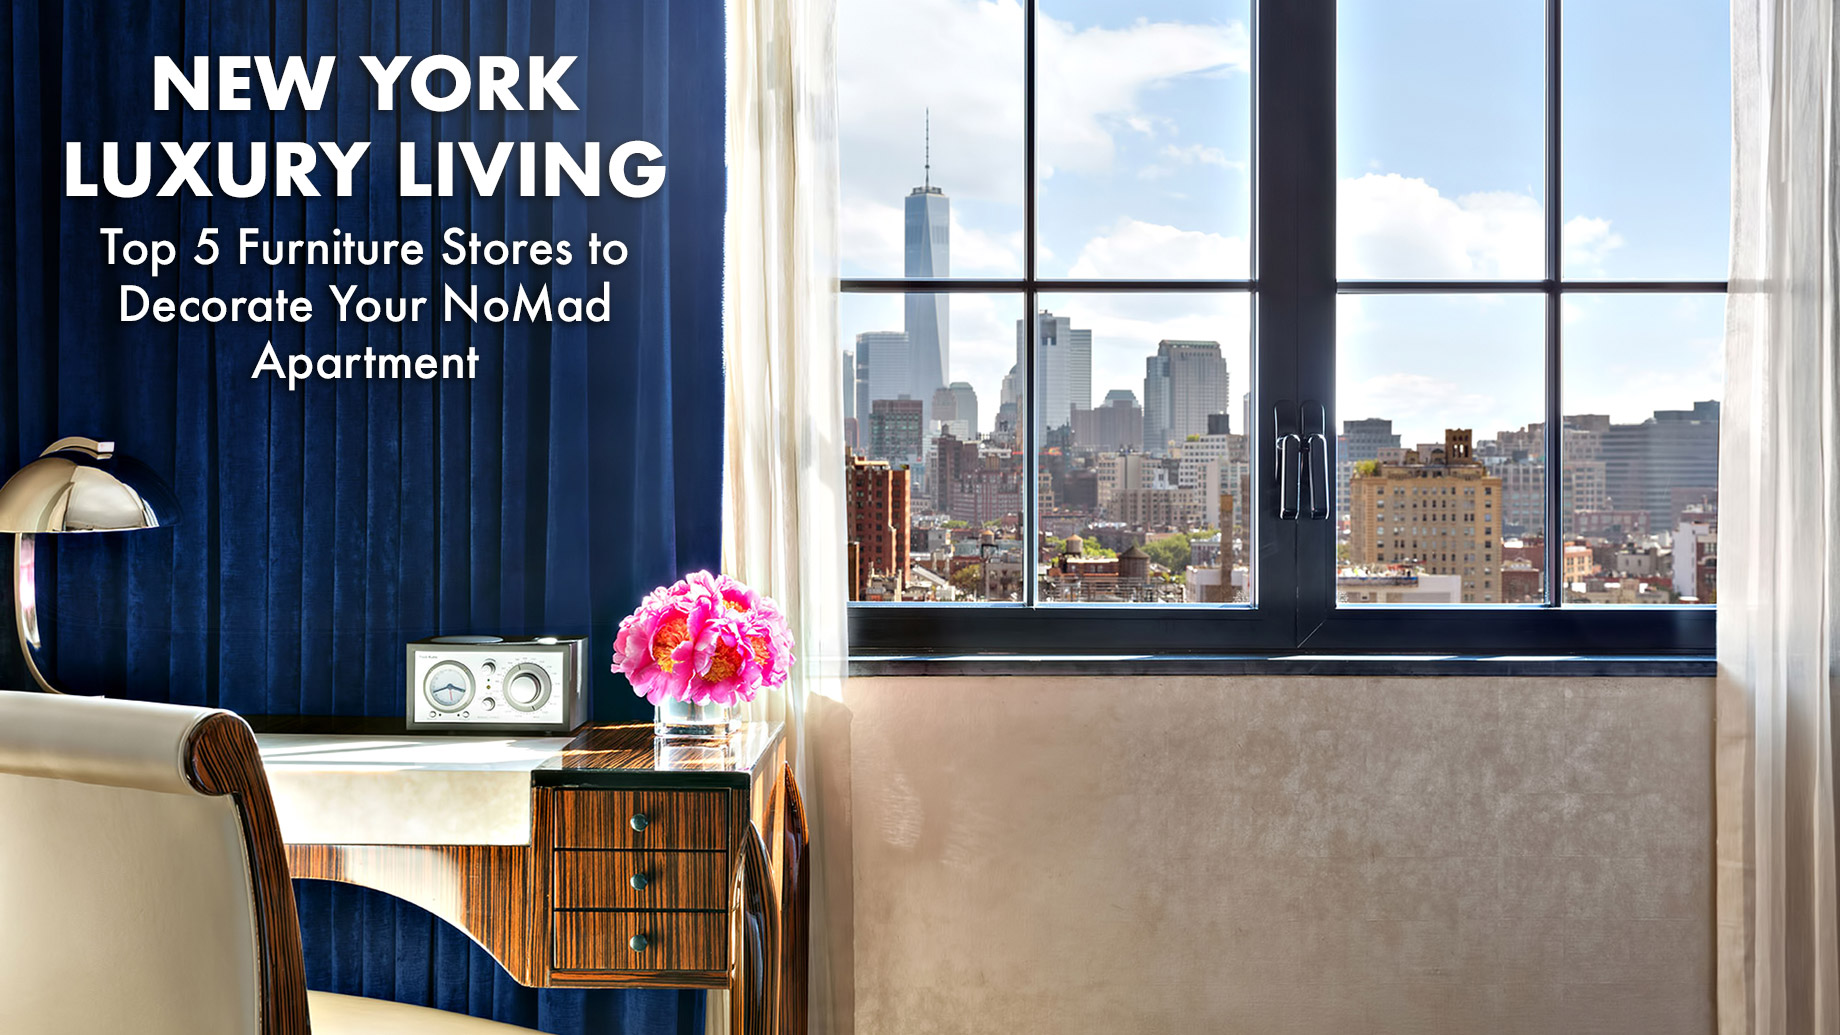 New York Luxury Living Top 5 Furniture Stores To Decorate Your Nomad Apartment The Pinnacle List,What Is Caramel Made Of Yahoo Answers